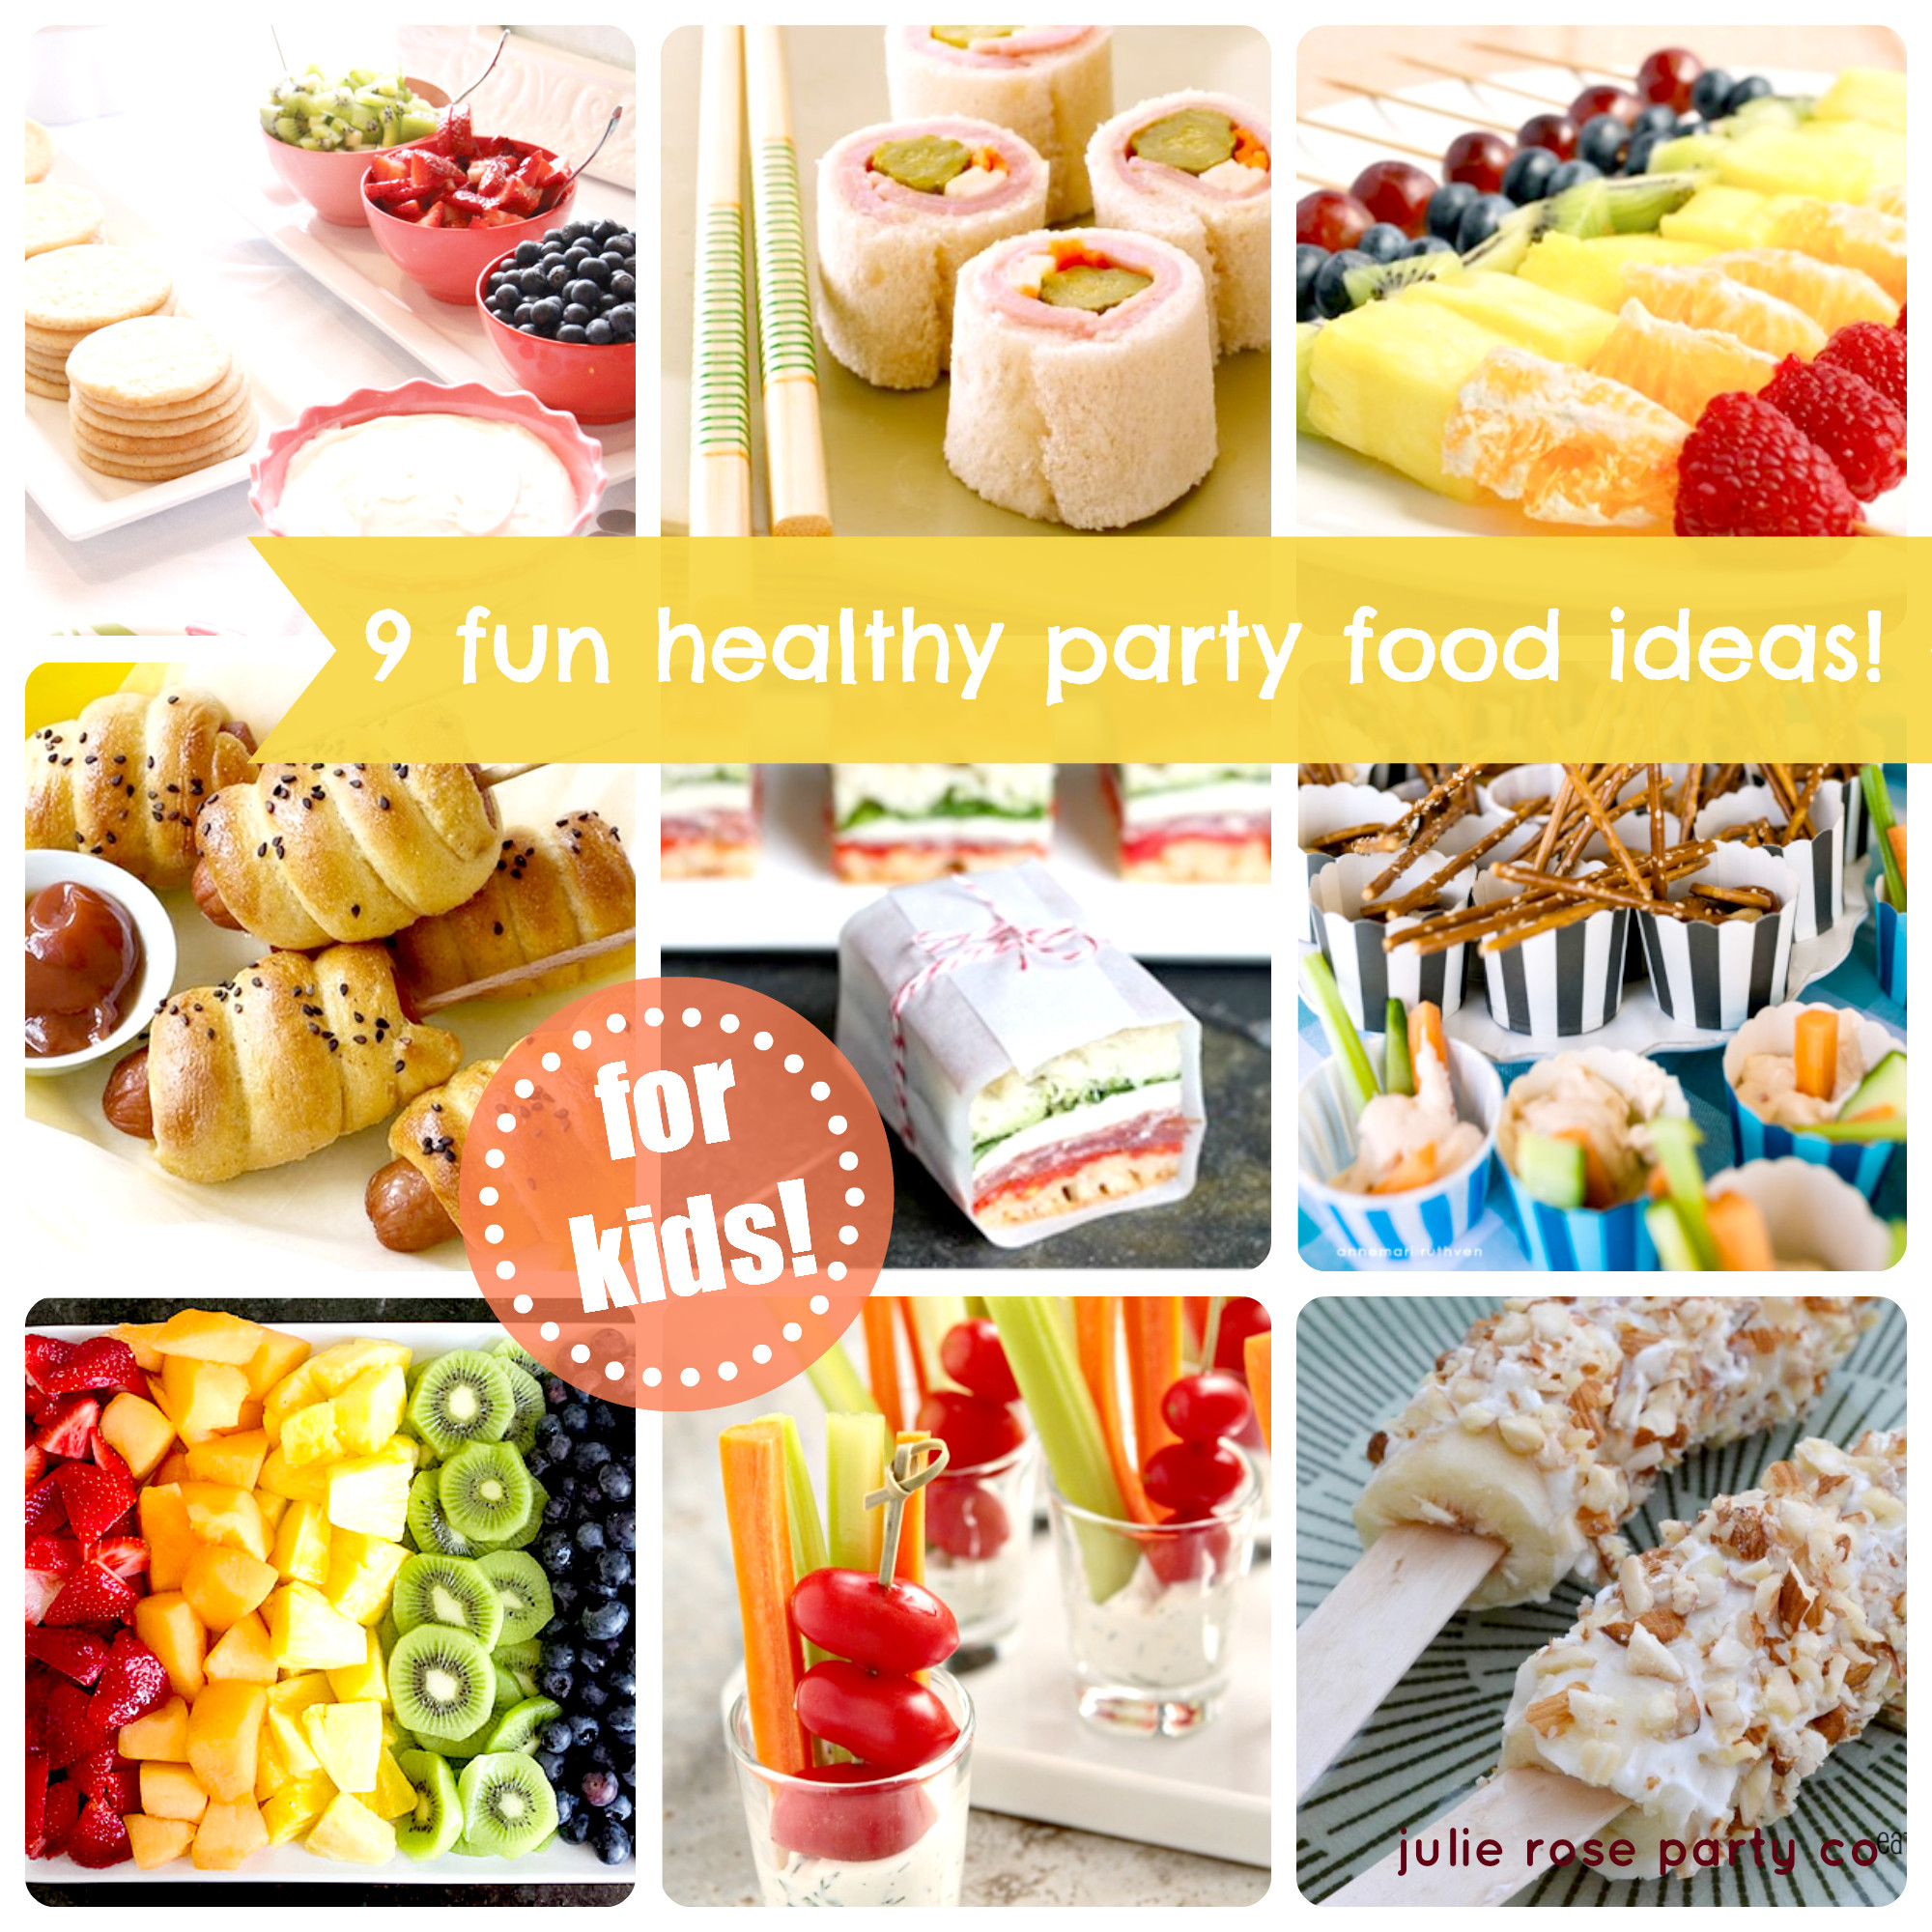 Kids Birthday Party Food Idea
 9 fun and healthy party food ideas kids